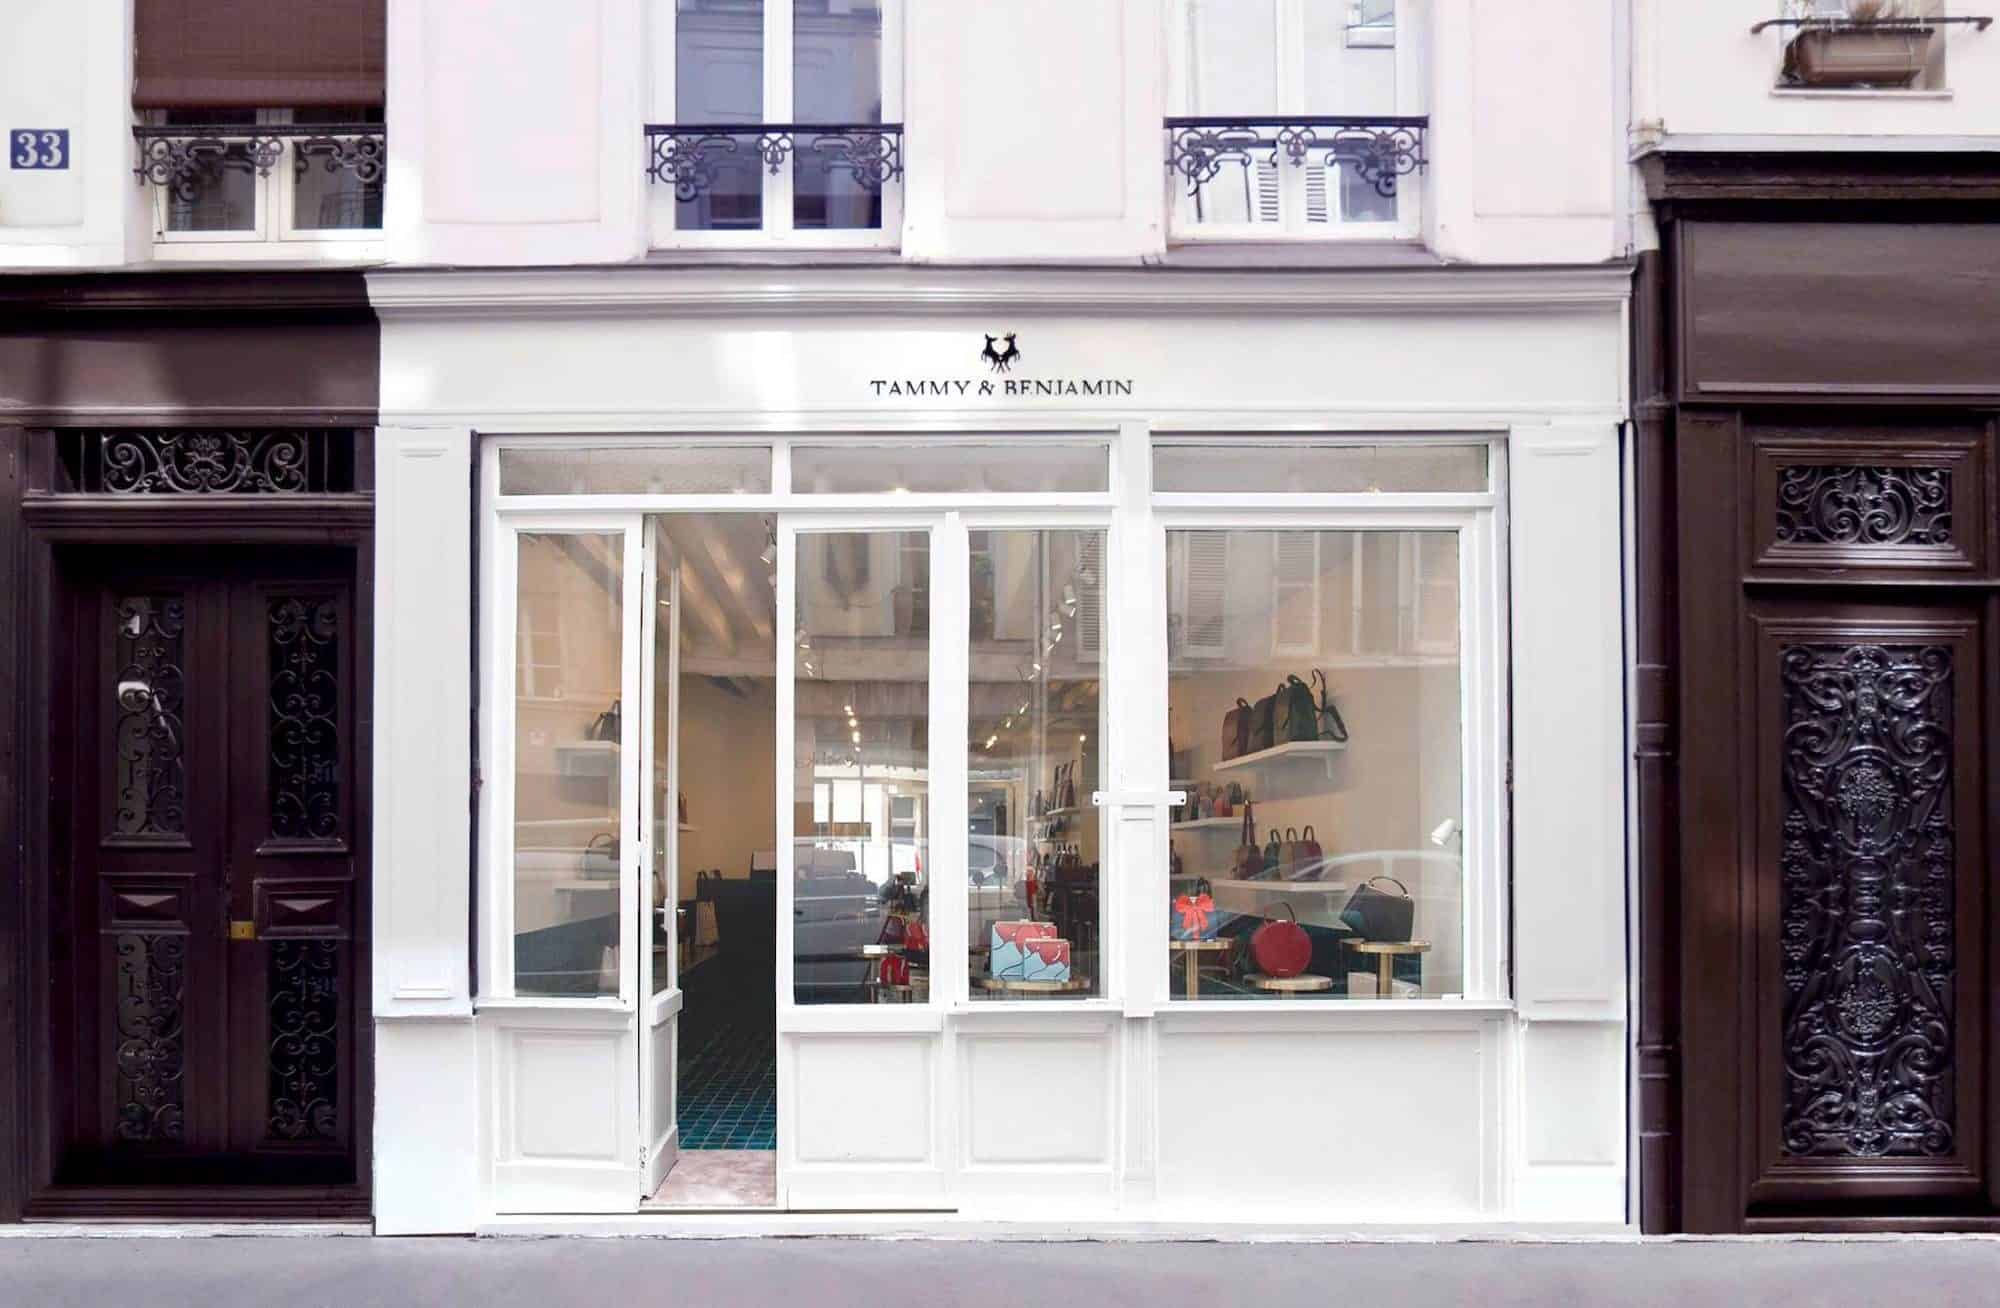 The exterior of the Tammy and Benjamin handbag store in Paris.